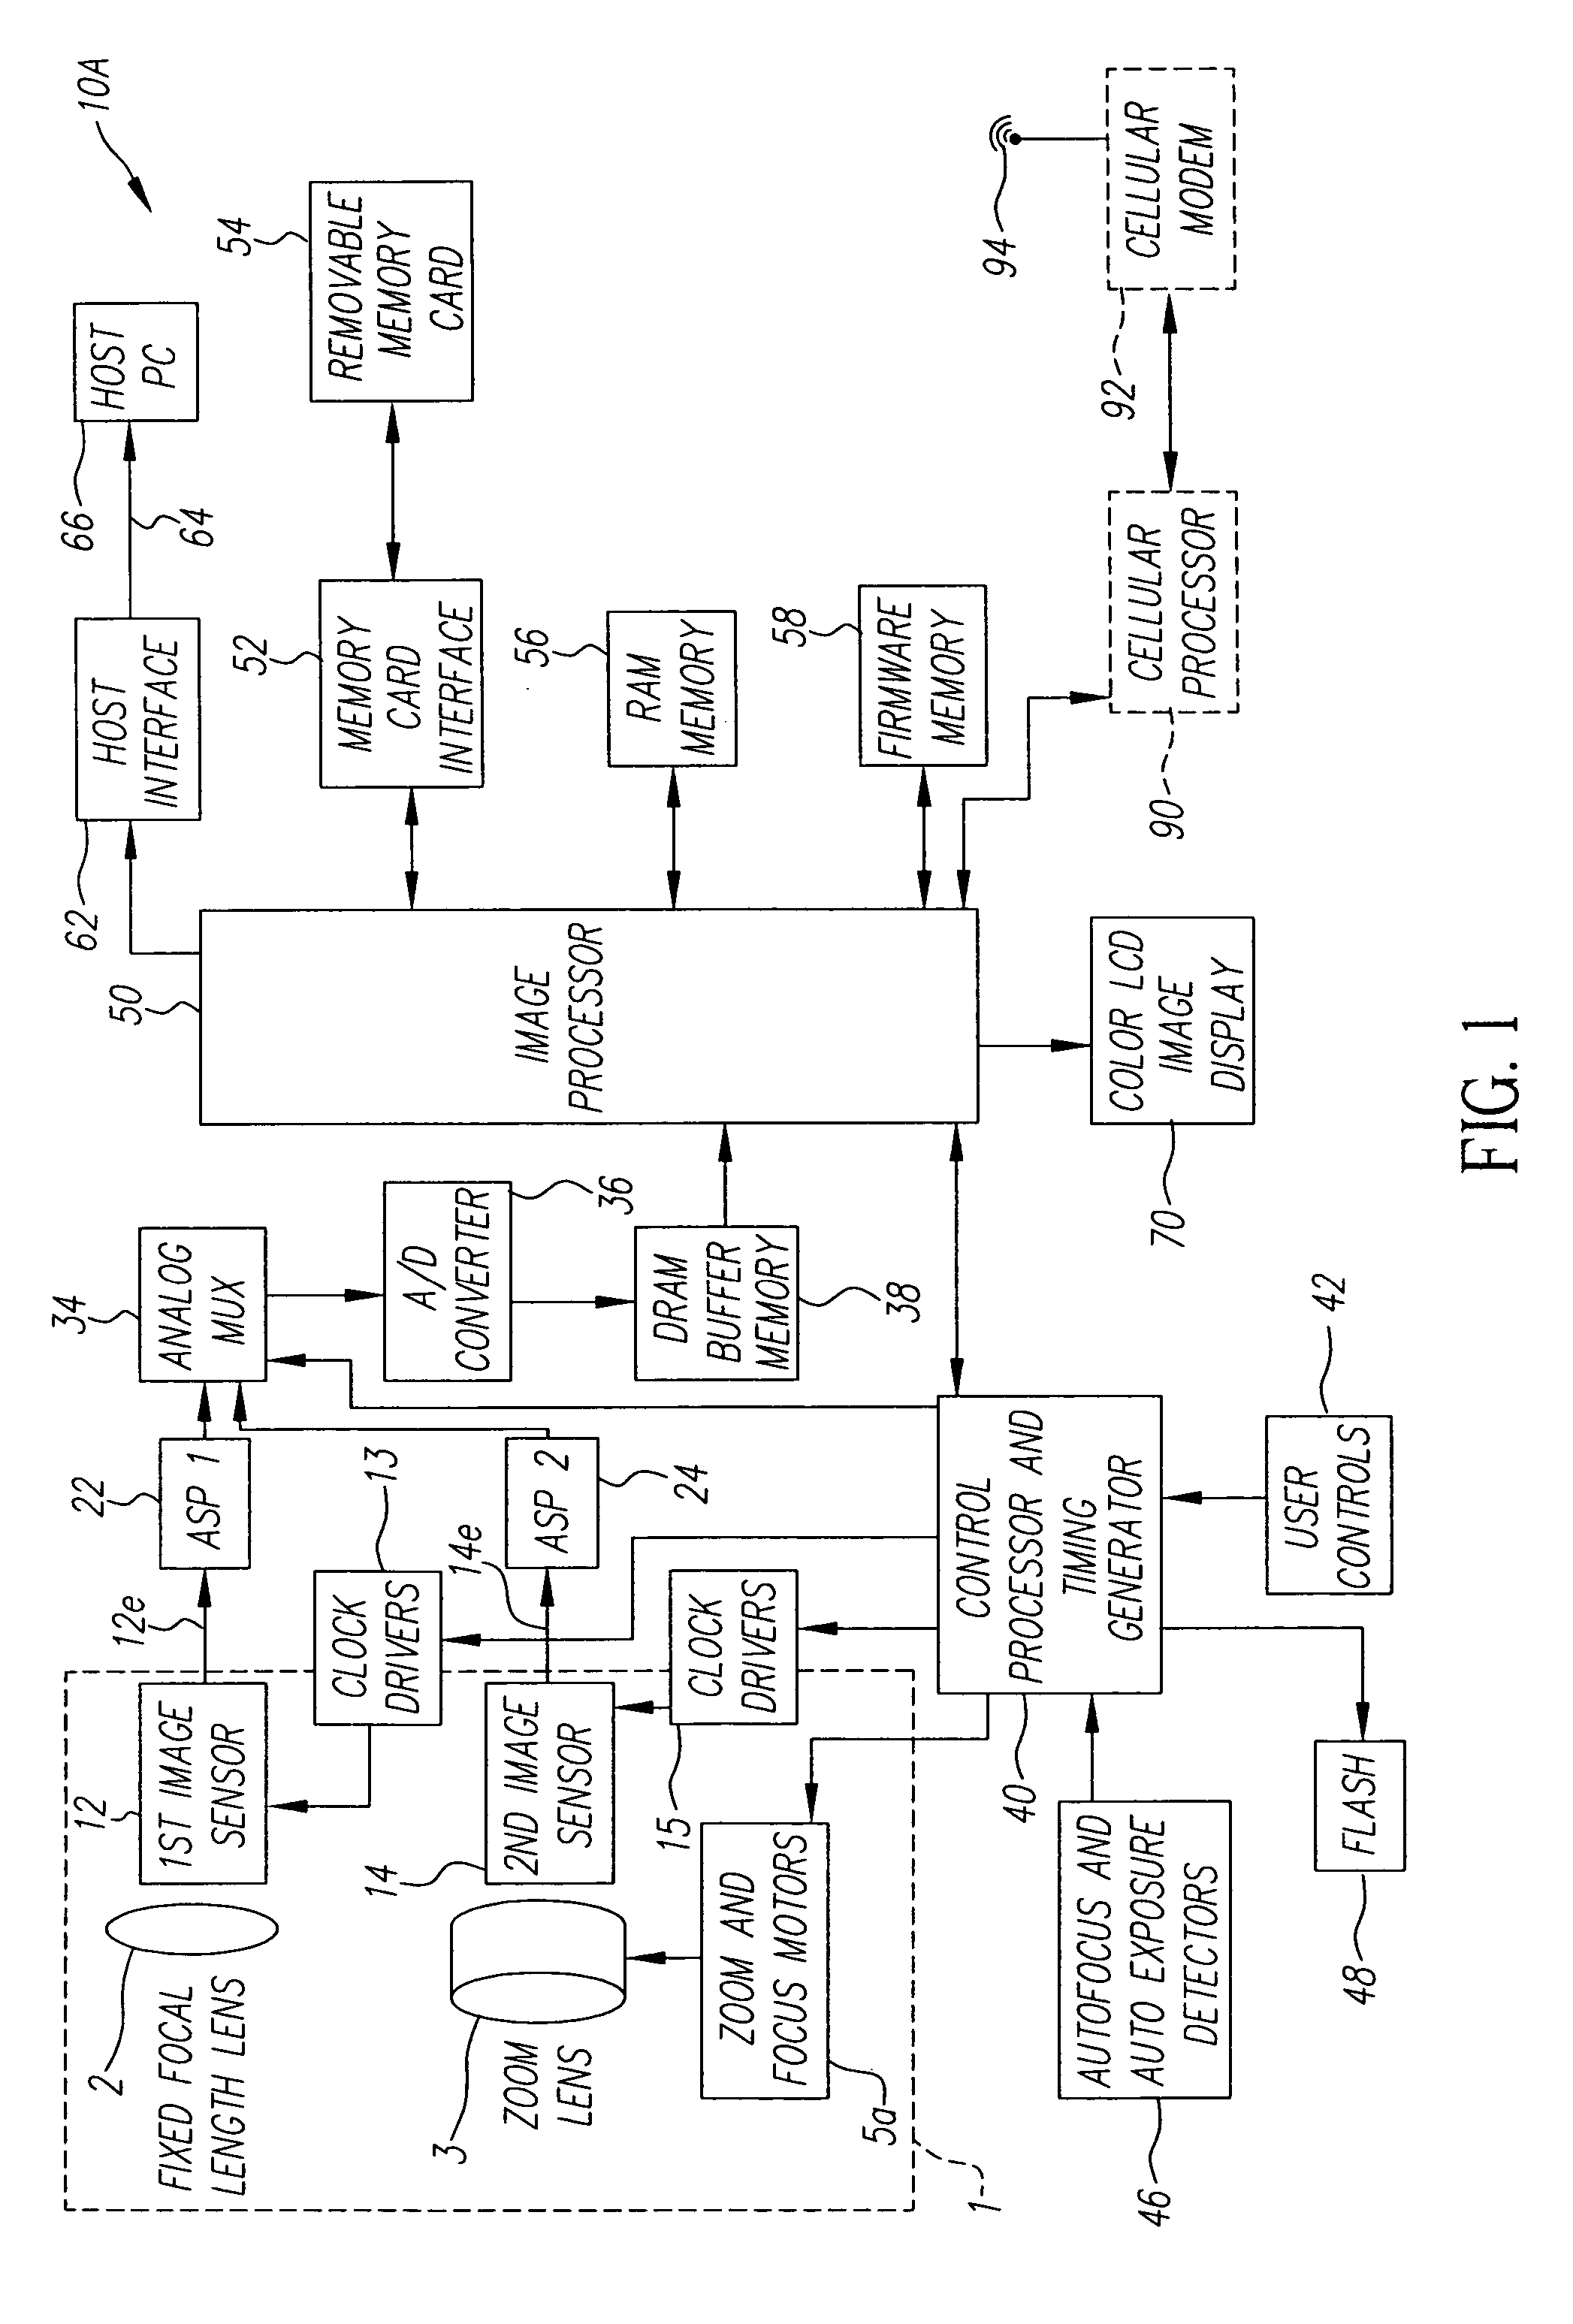 Digital camera using multiple fixed focal length lenses and multiple image sensors to provide an extended zoom range